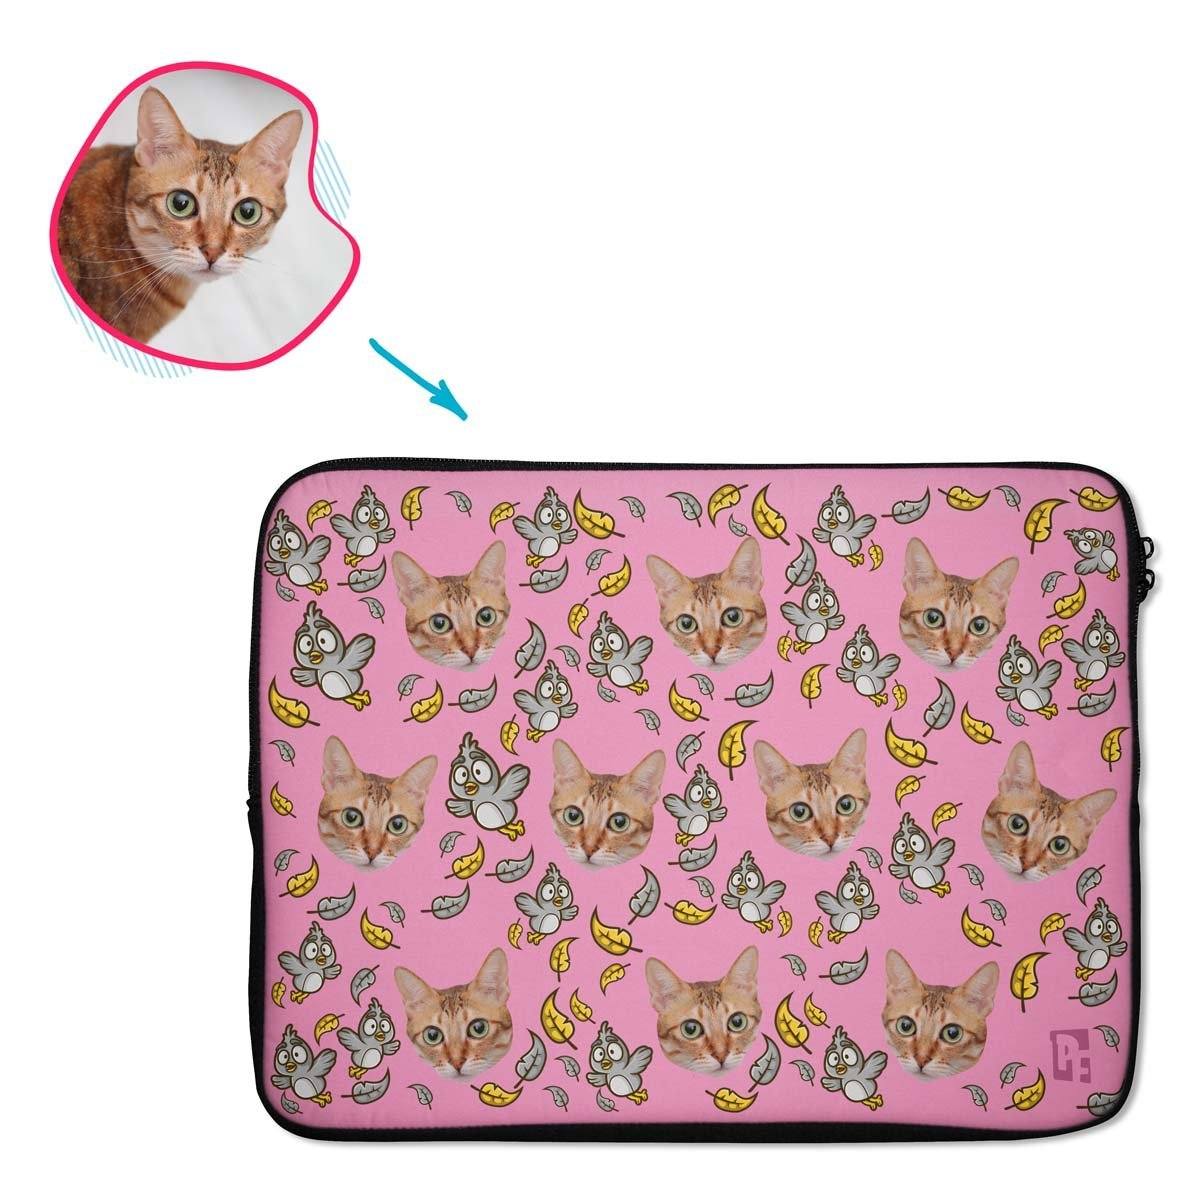 pink Bird laptop sleeve personalized with photo of face printed on them